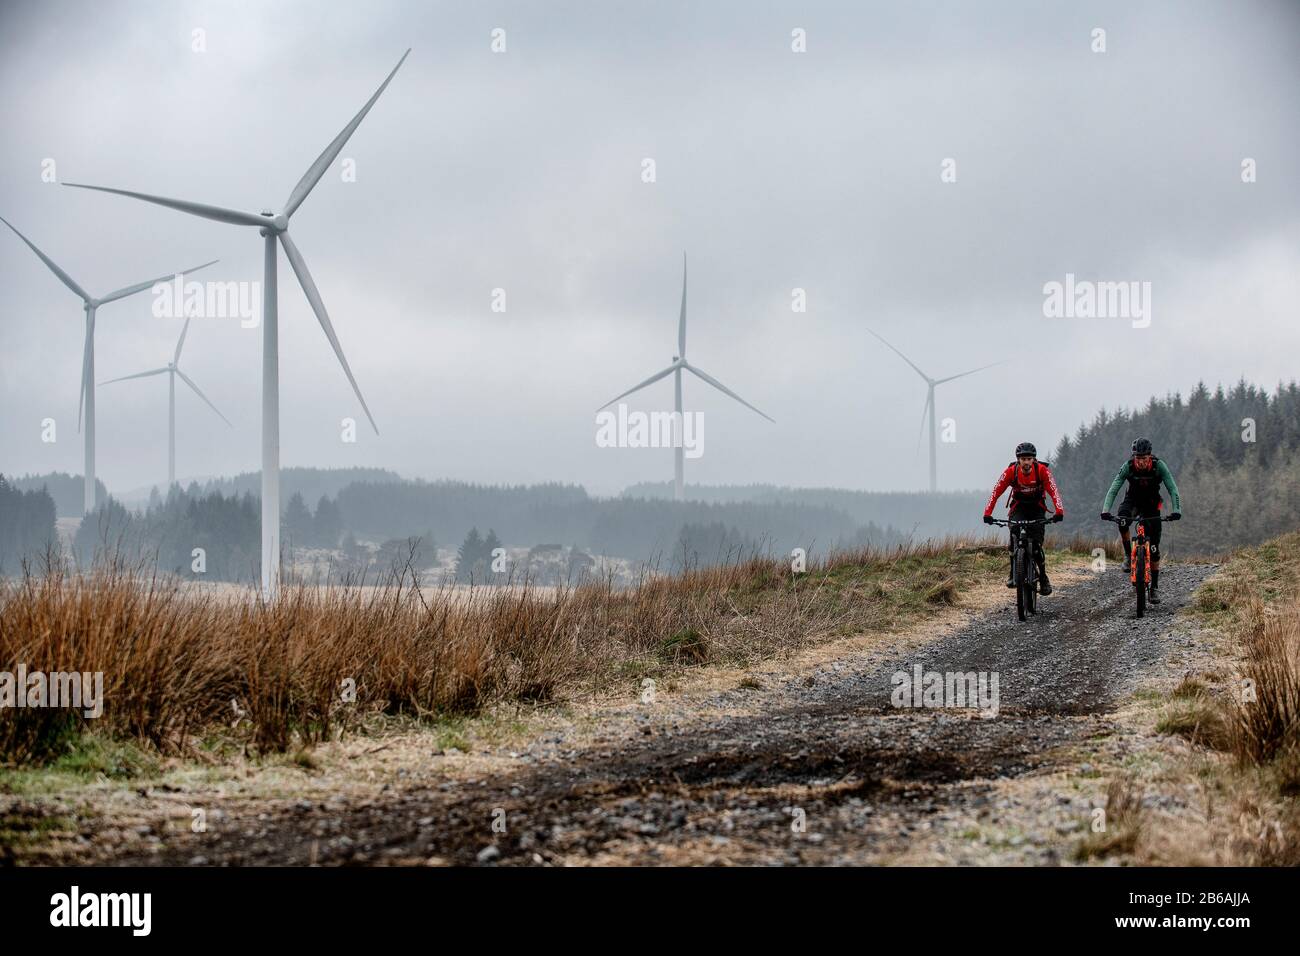 Ride The Wind High Resolution Stock Photography and - Alamy